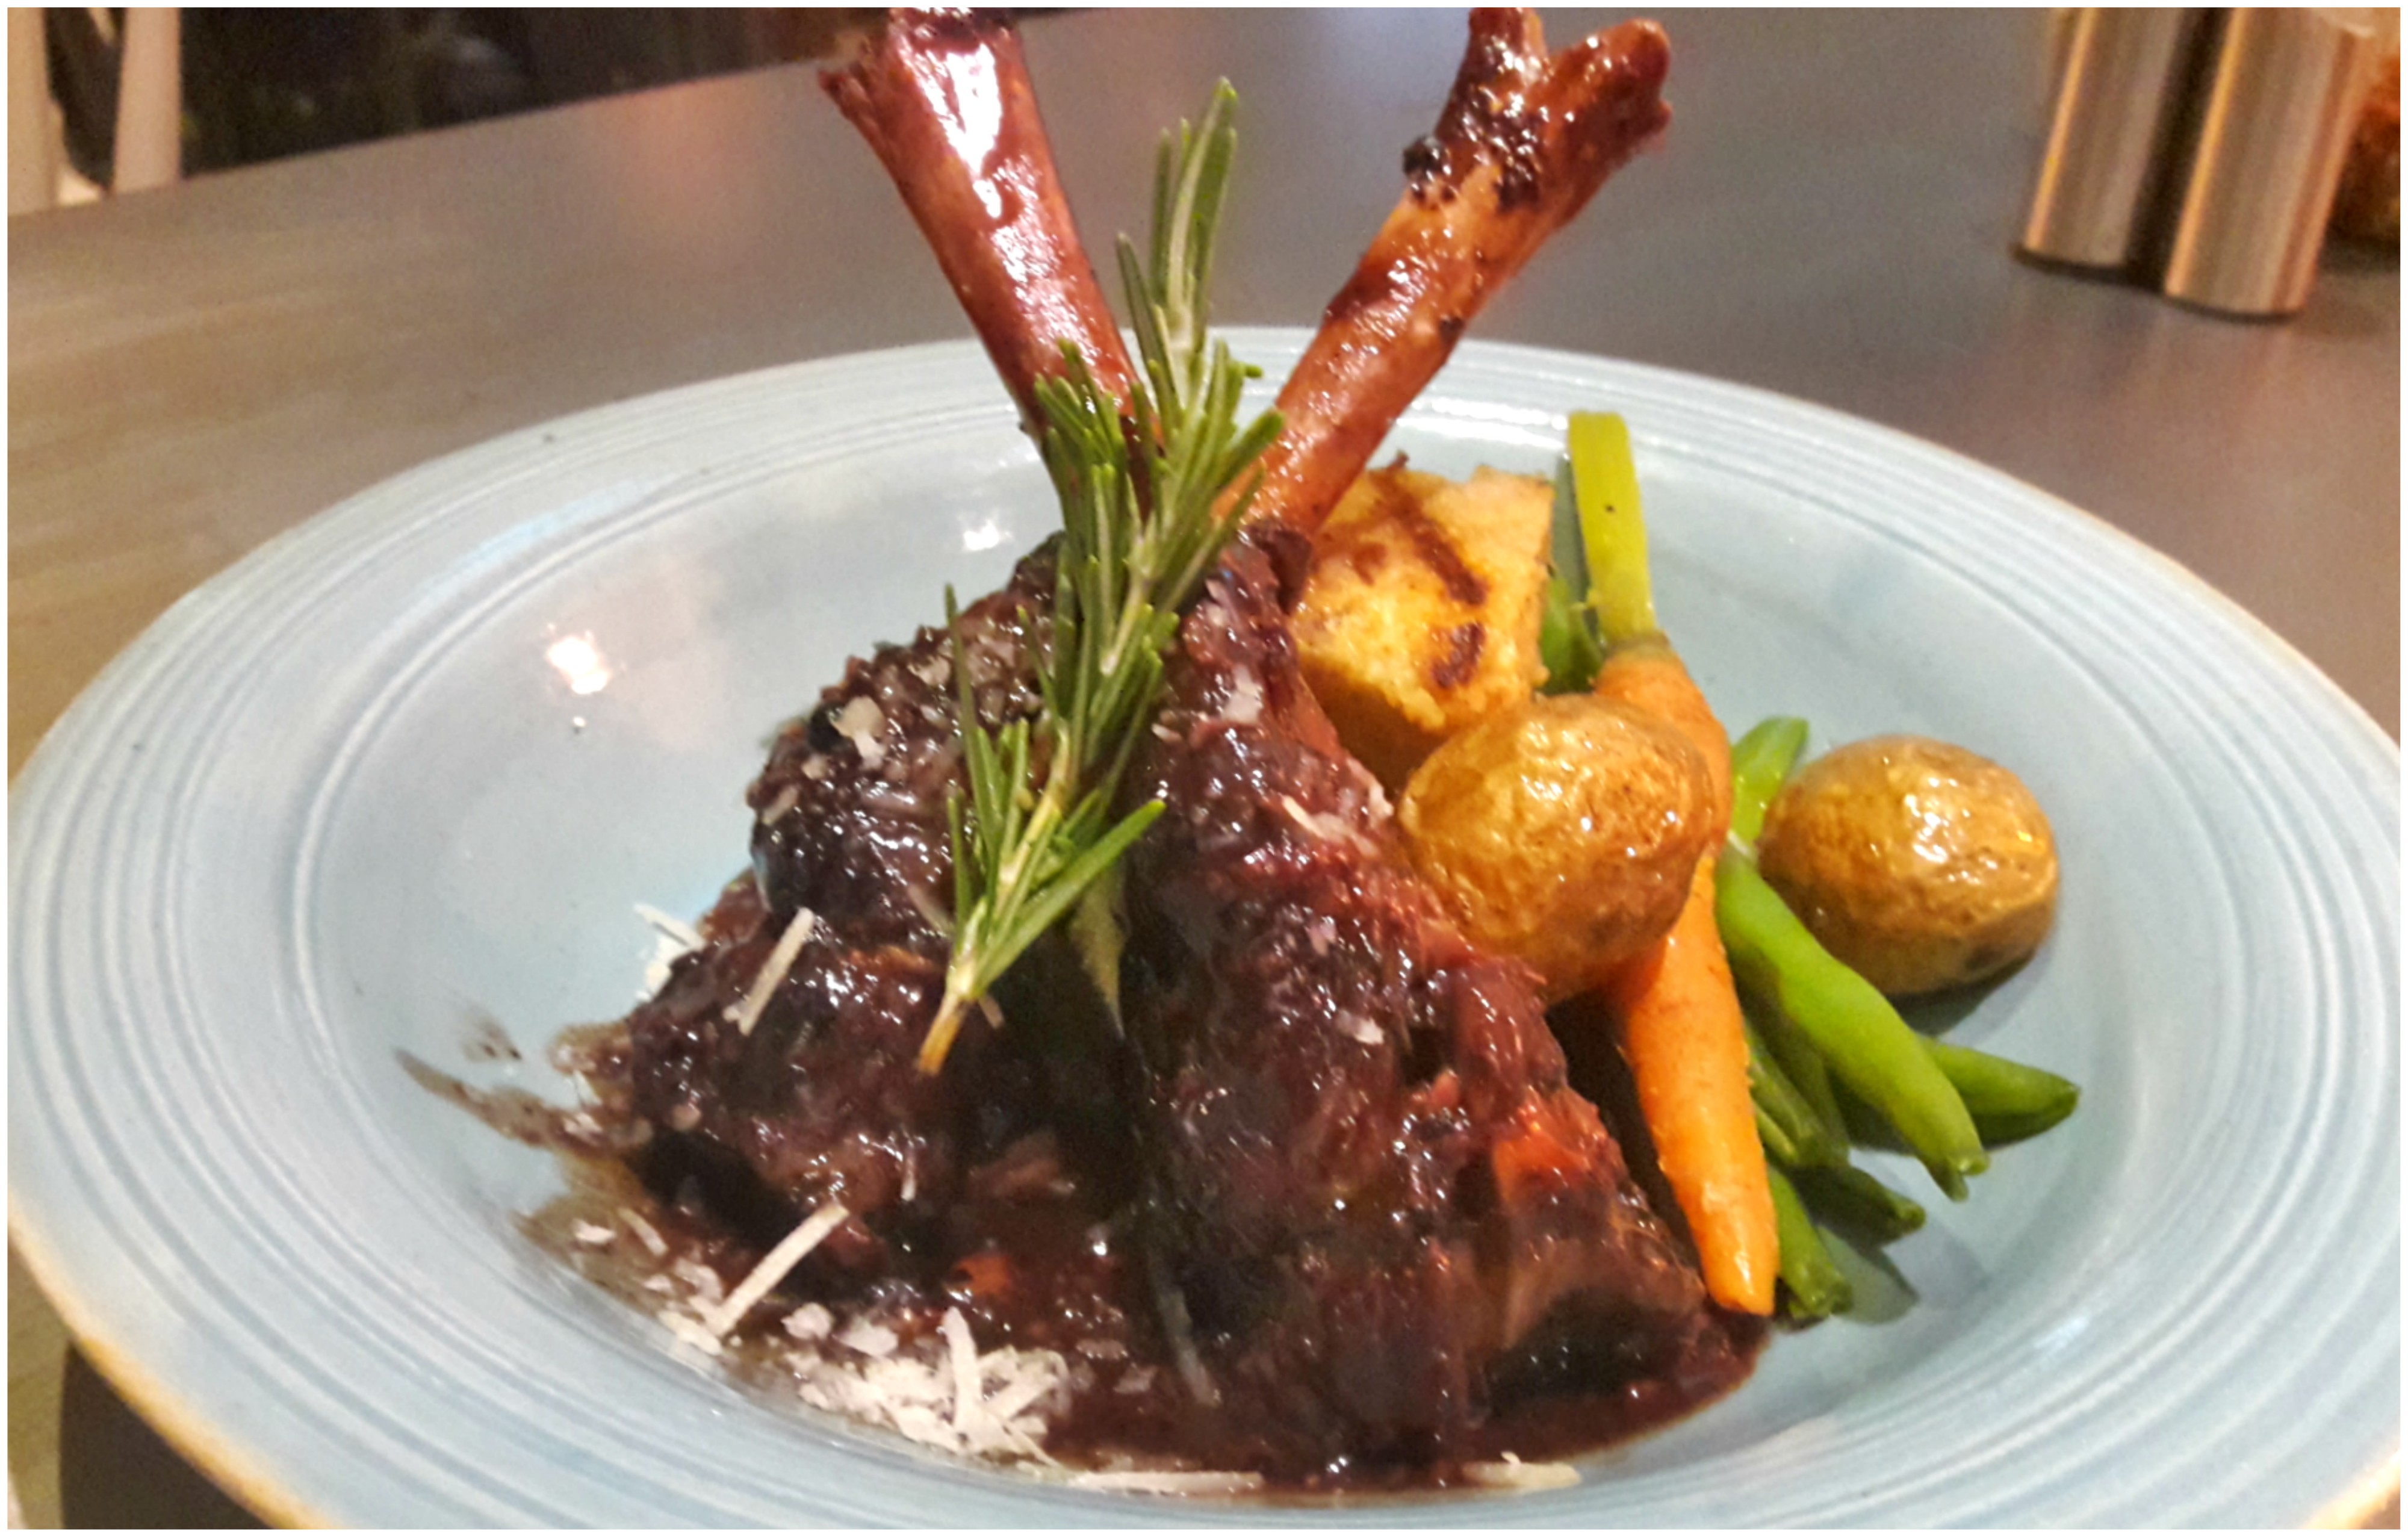 Lamb Shanks with Parmesan Polenta in Red Wine Sauce